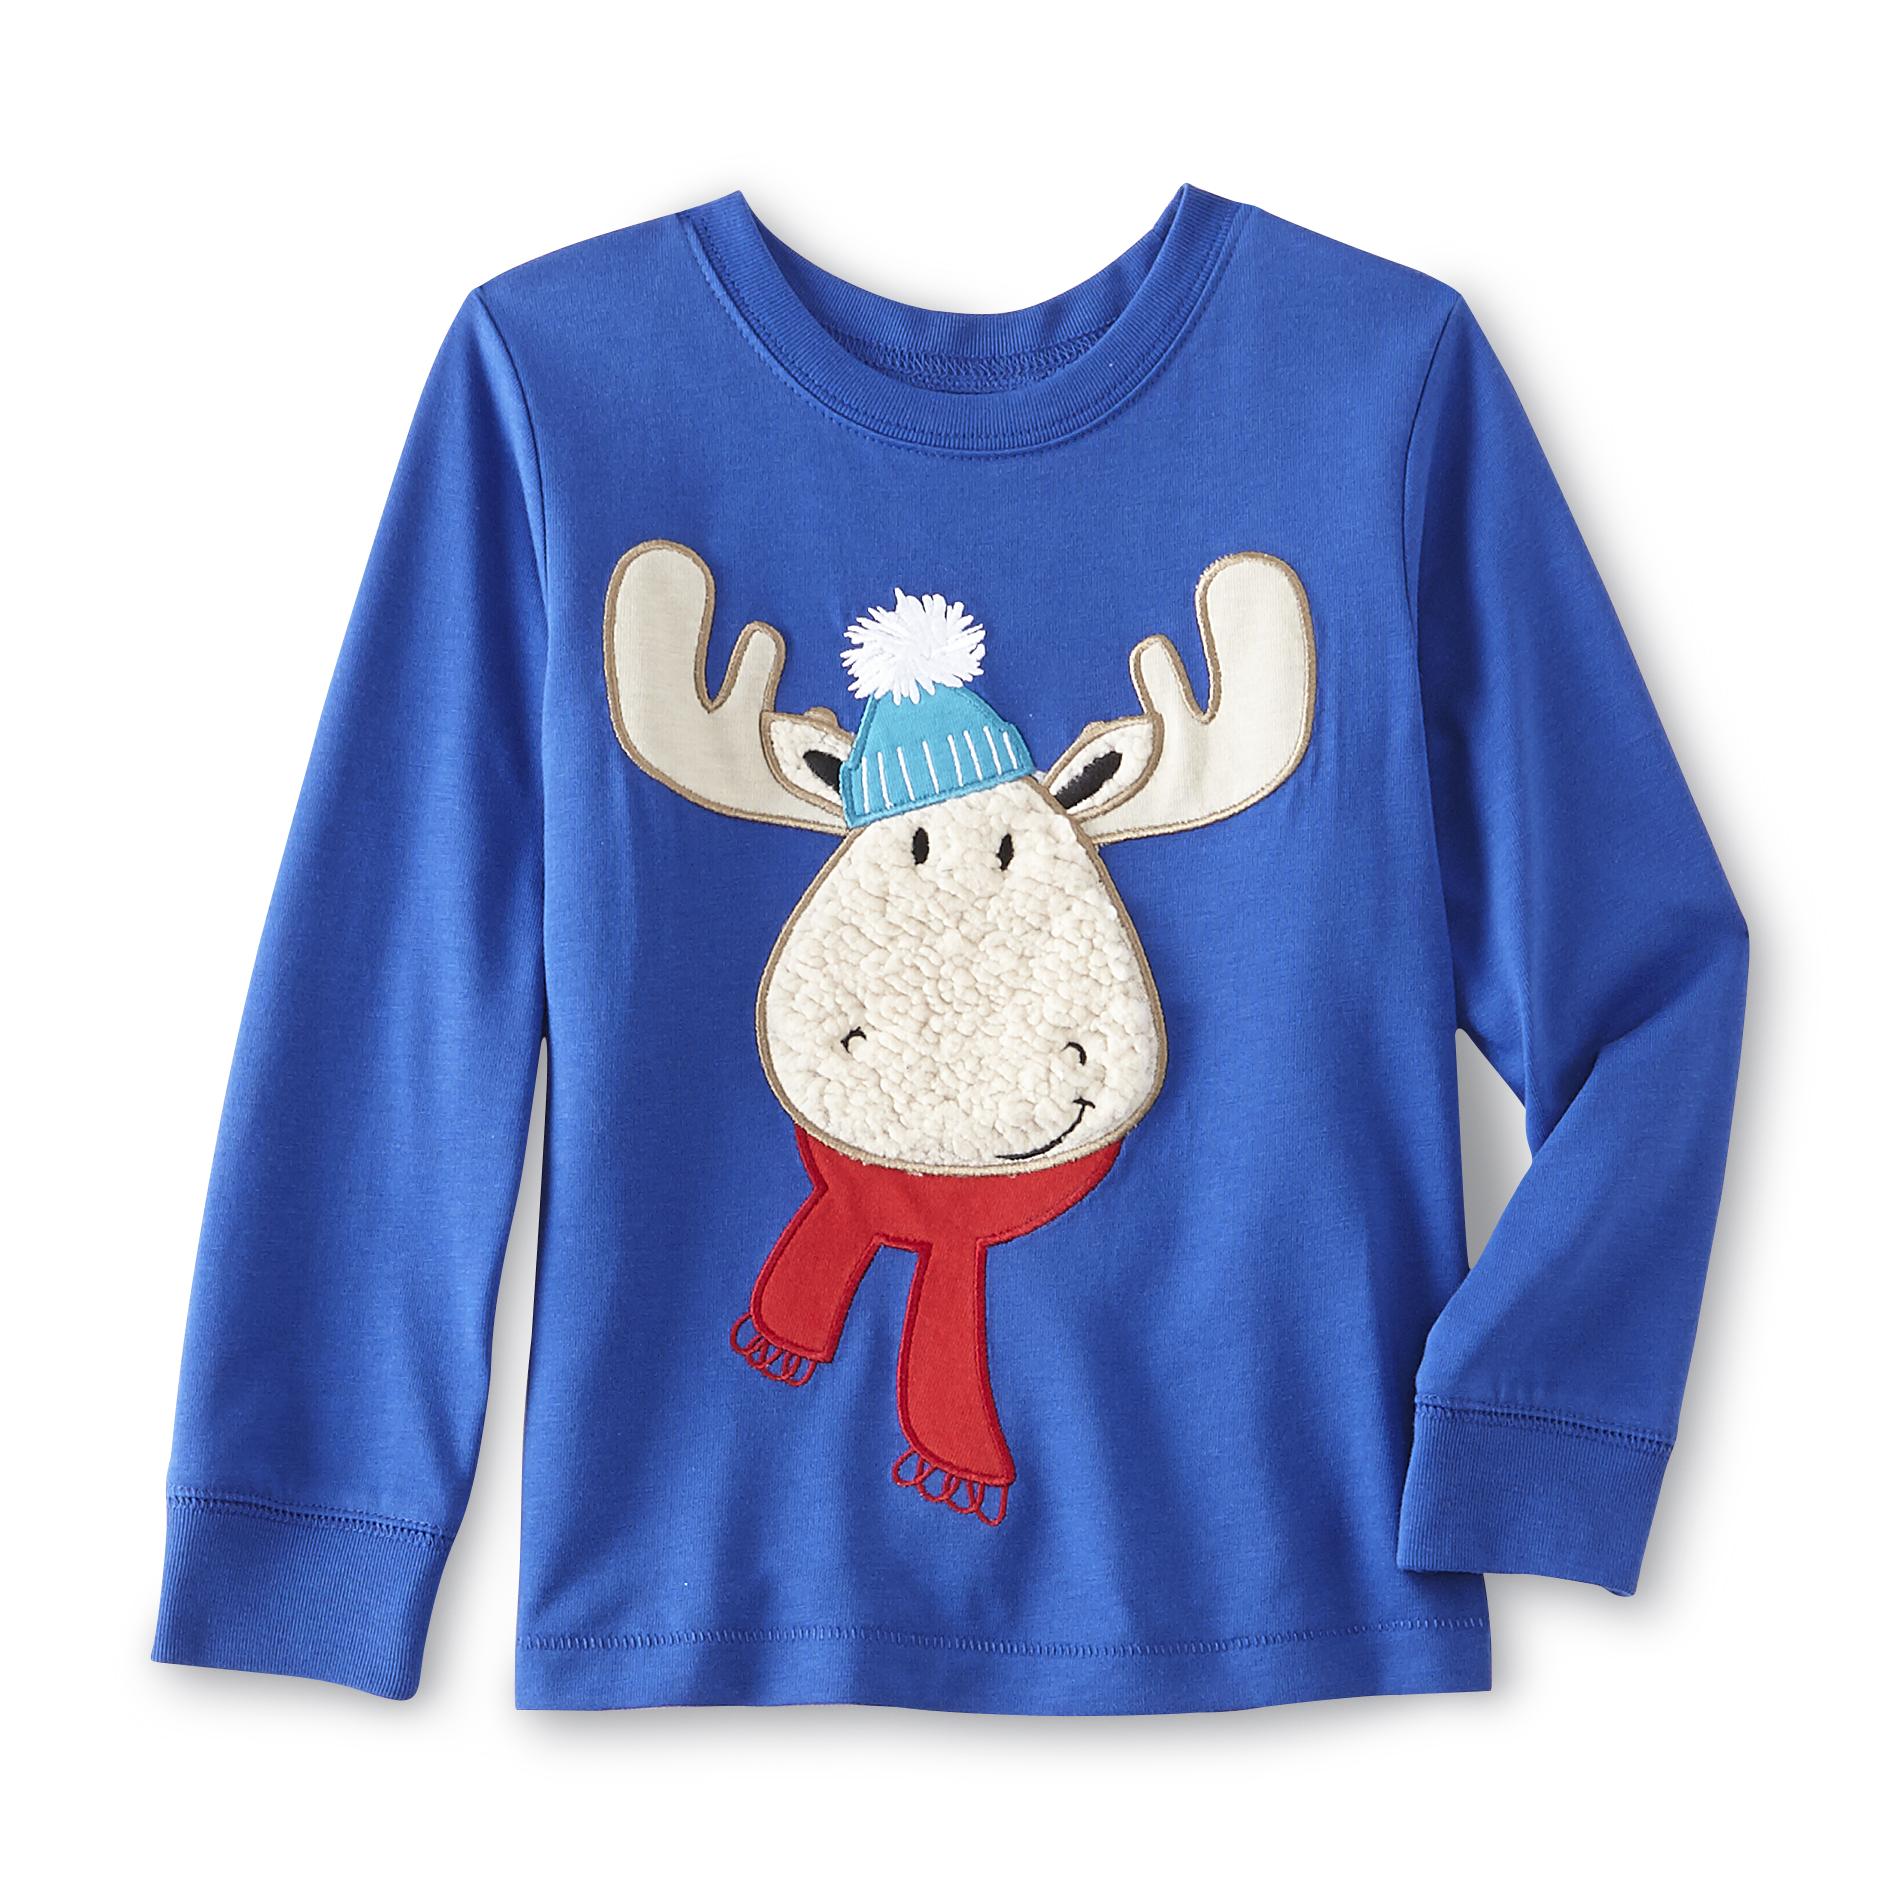 Infant & Toddler Boy's Graphic T-Shirt - Fuzzy Moose